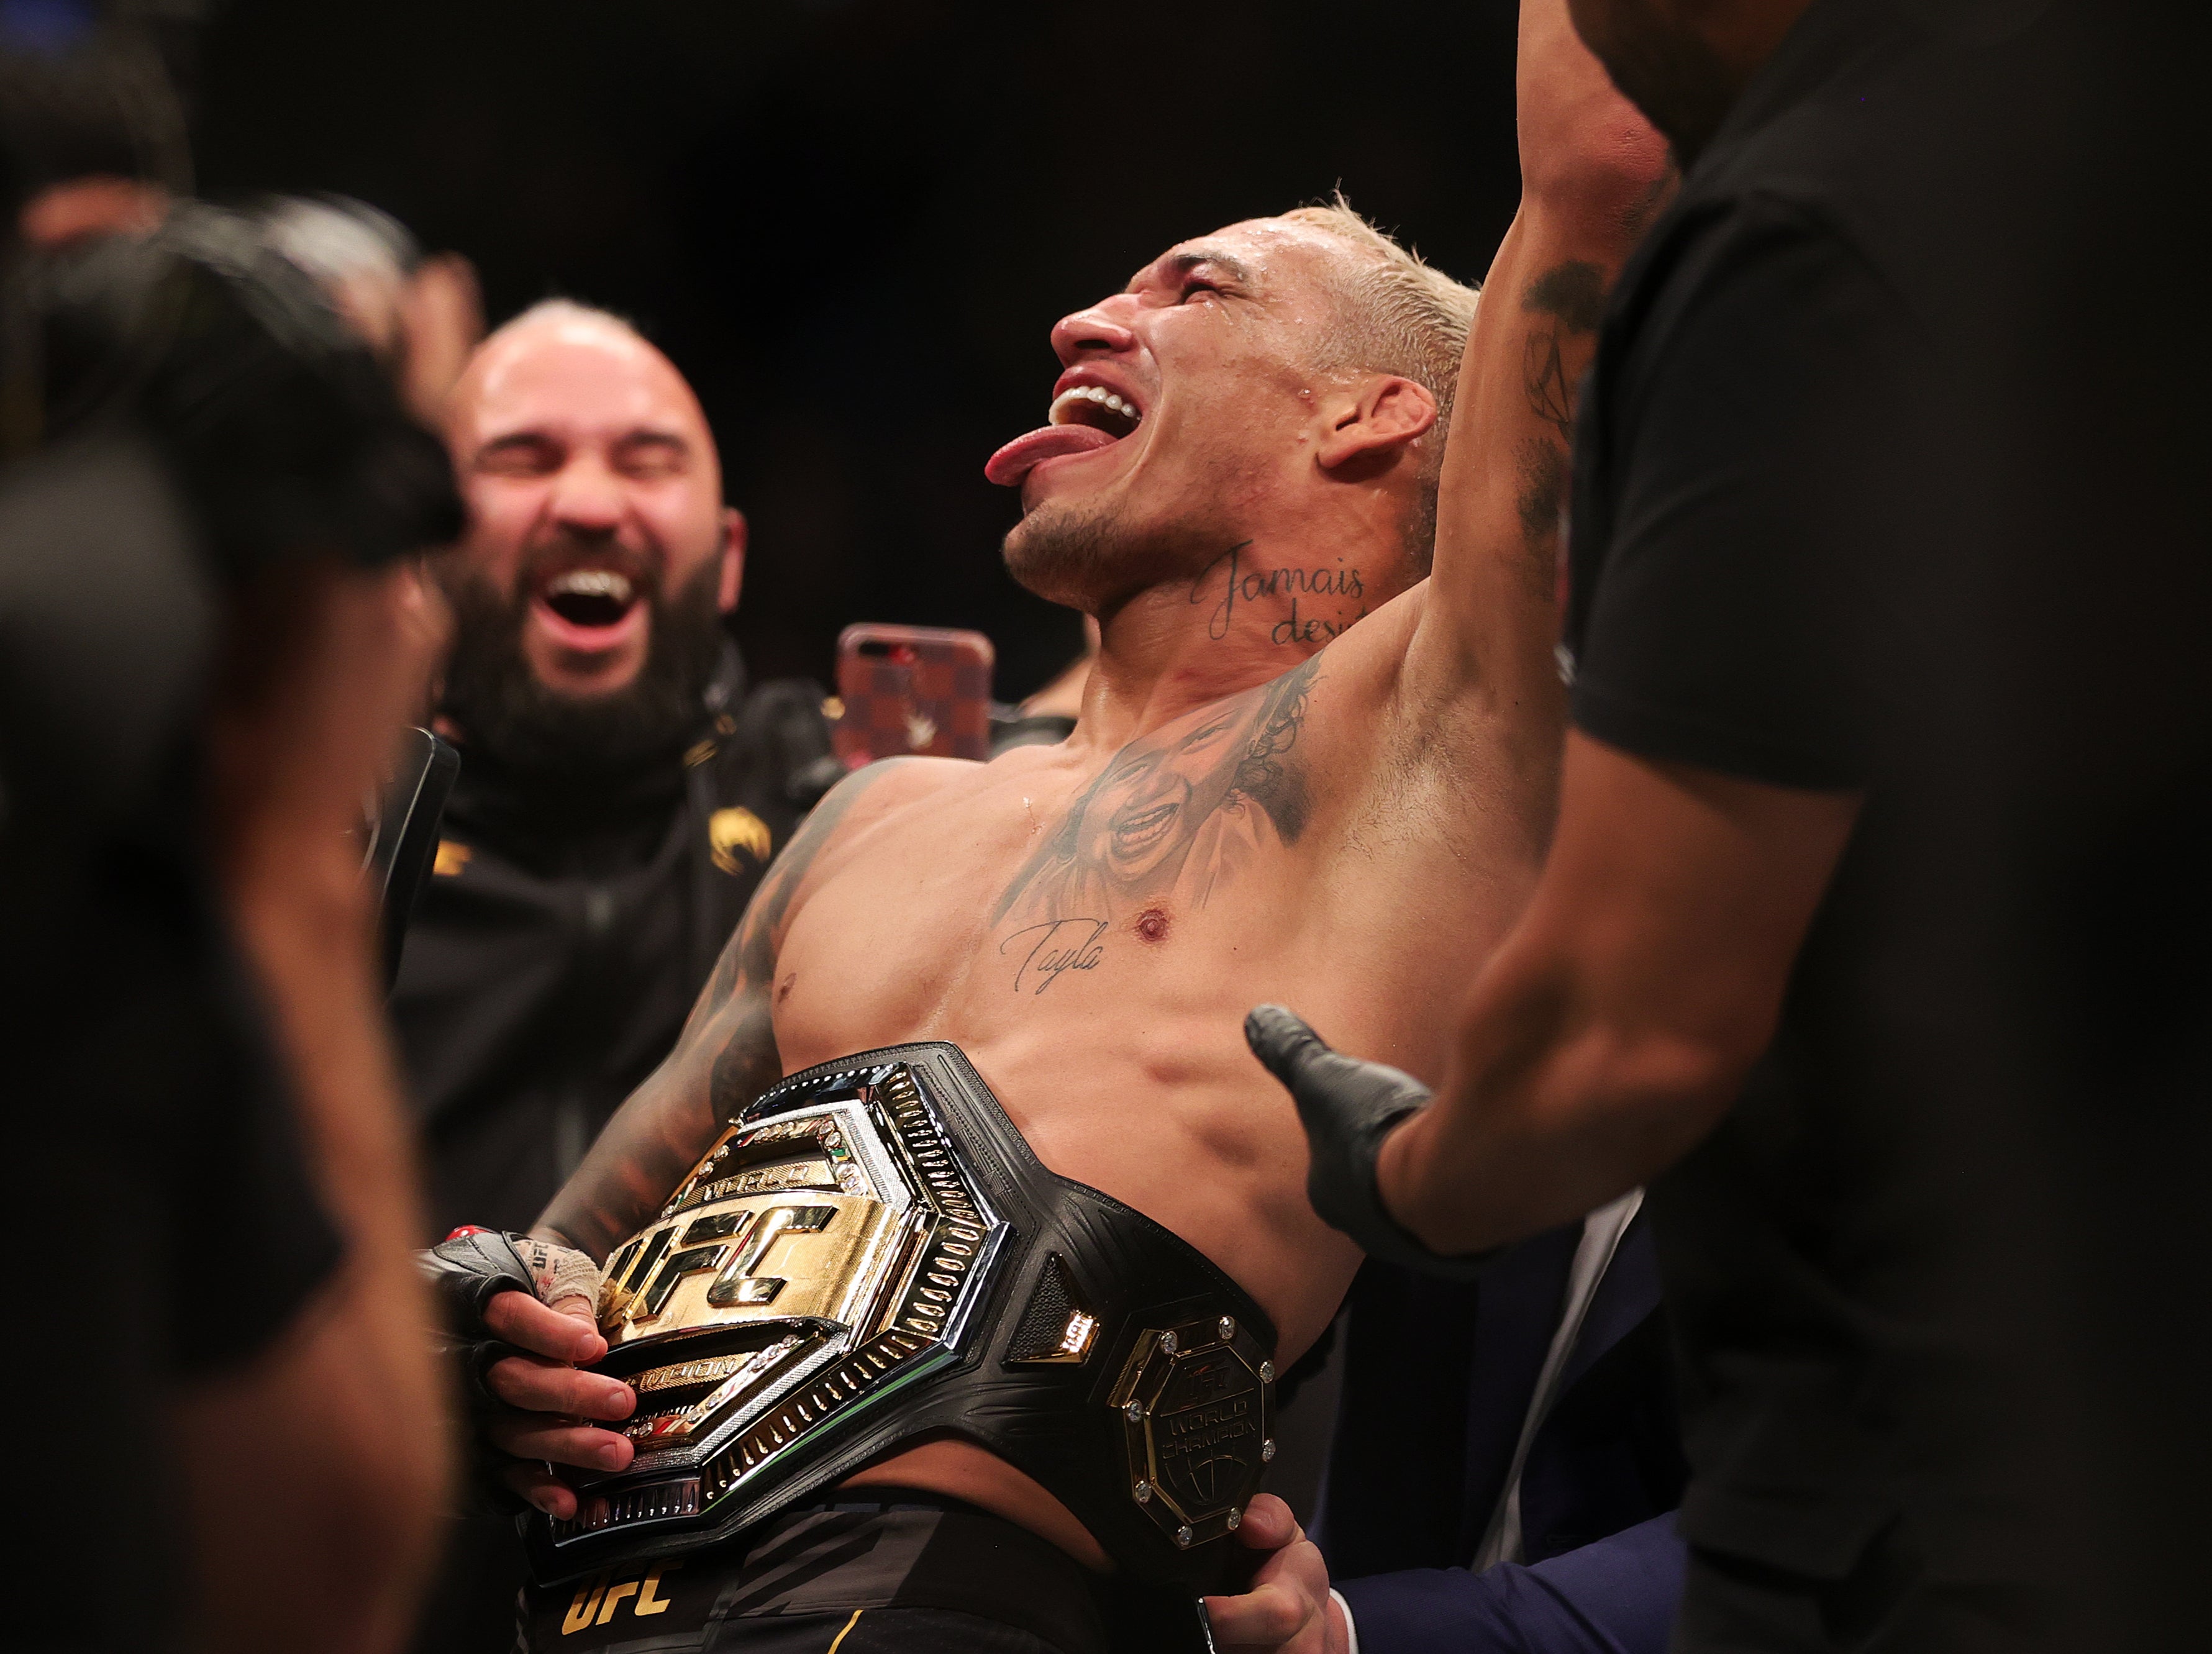 UFC lightweight champion Charles Oliveira has won 10 fights in a row